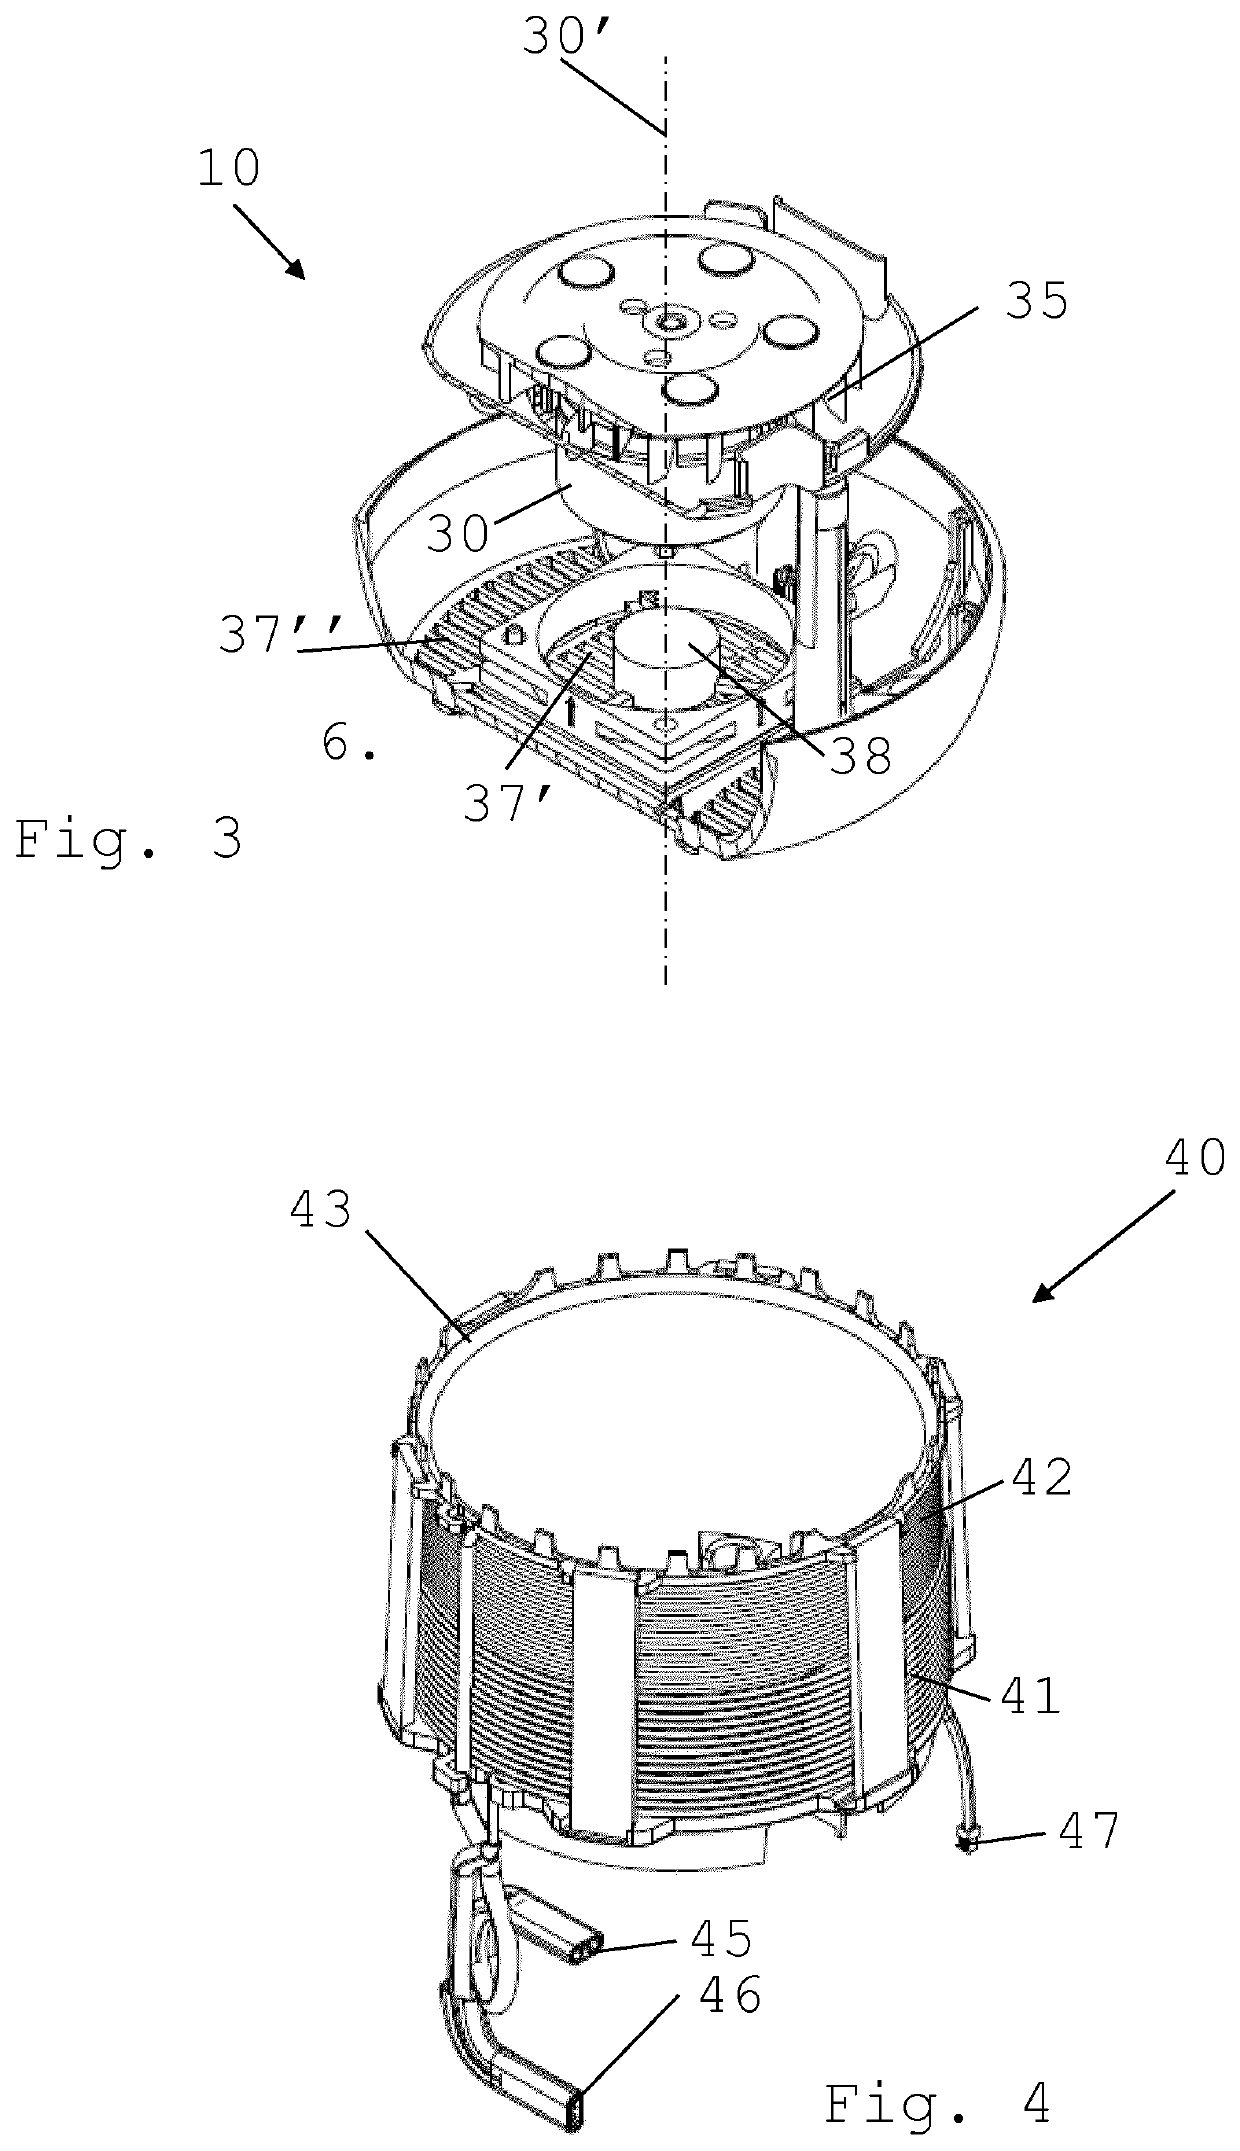 Controlled heat management for food processor